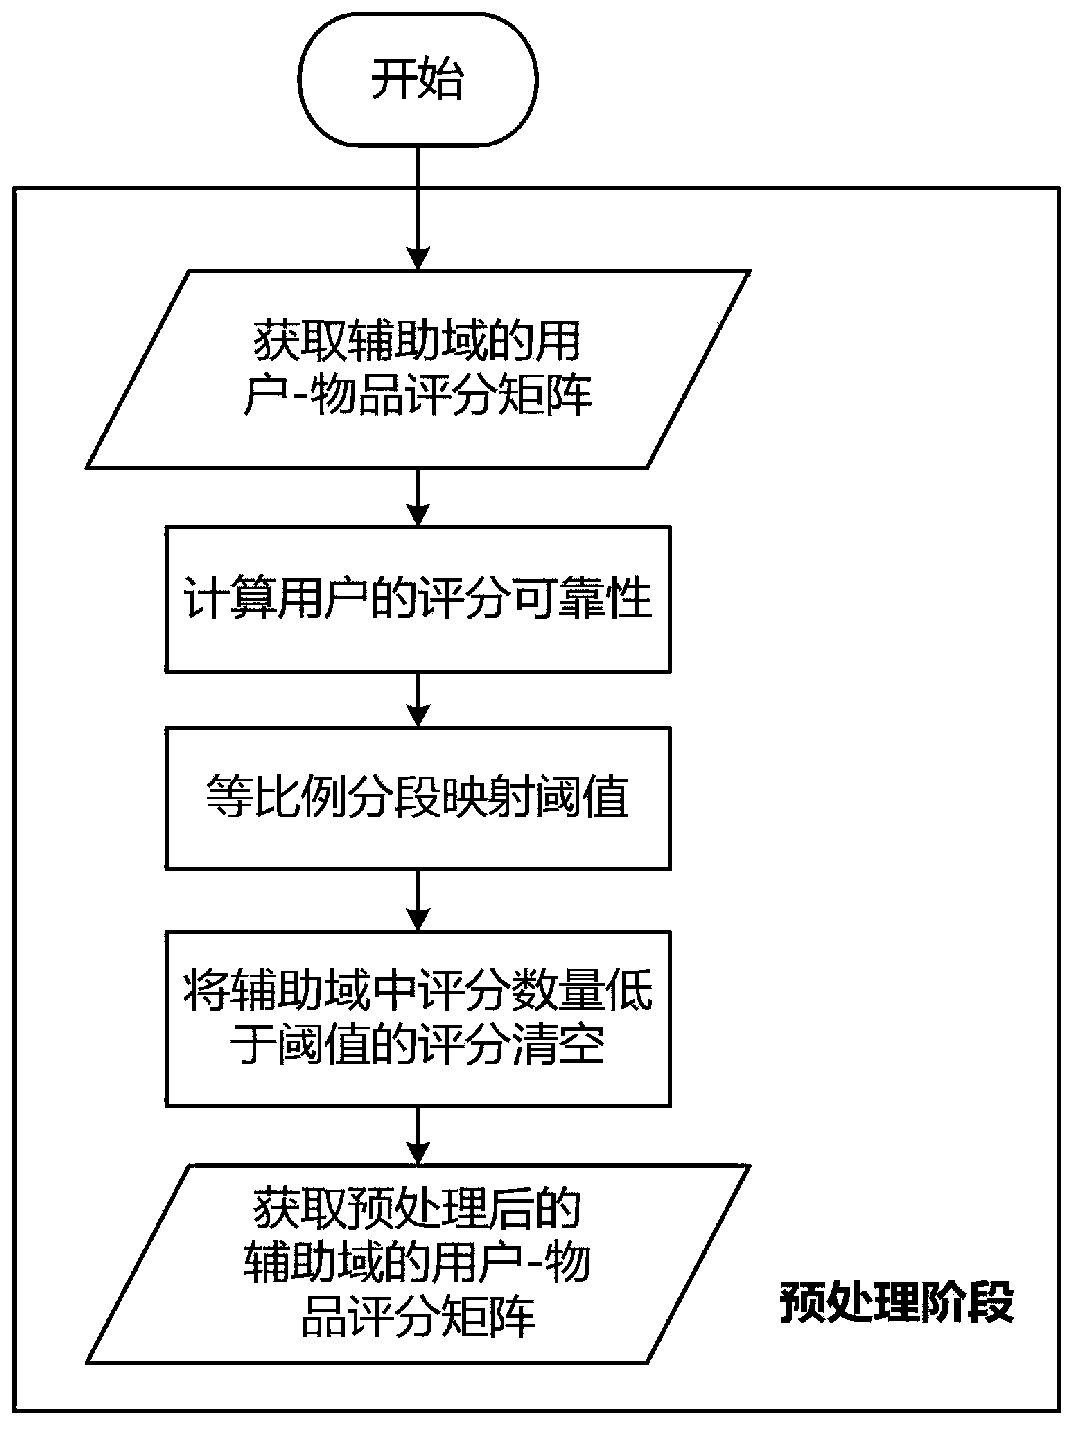 Cross-domain recommendation data processing method with multiple auxiliary domains and cross-domain recommendation system